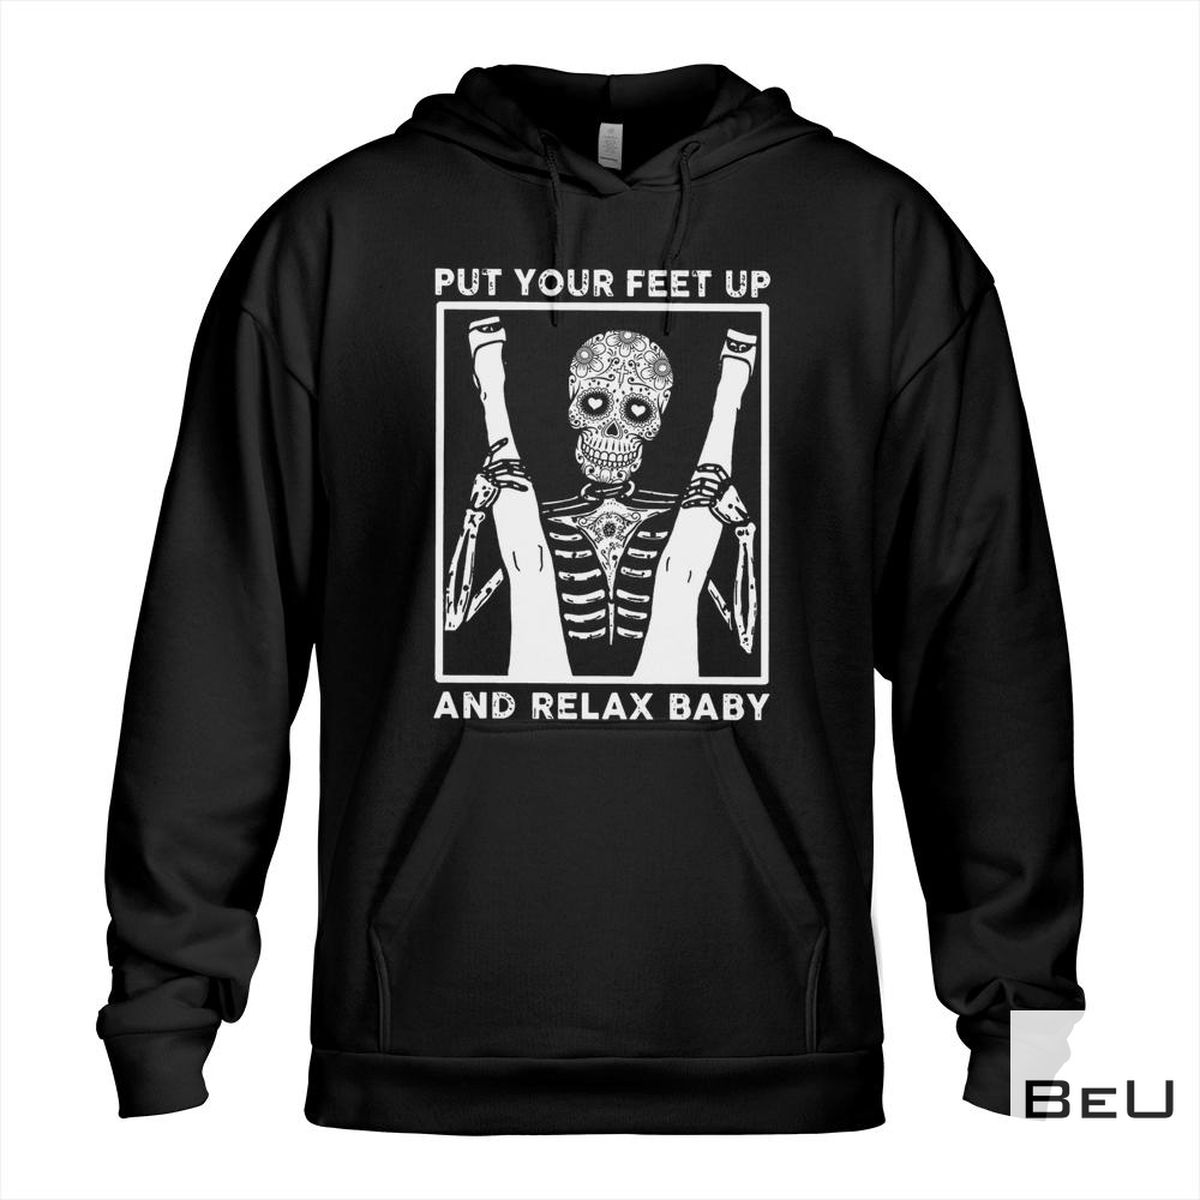 Put Your Feet Up And Relax Baby Shirt